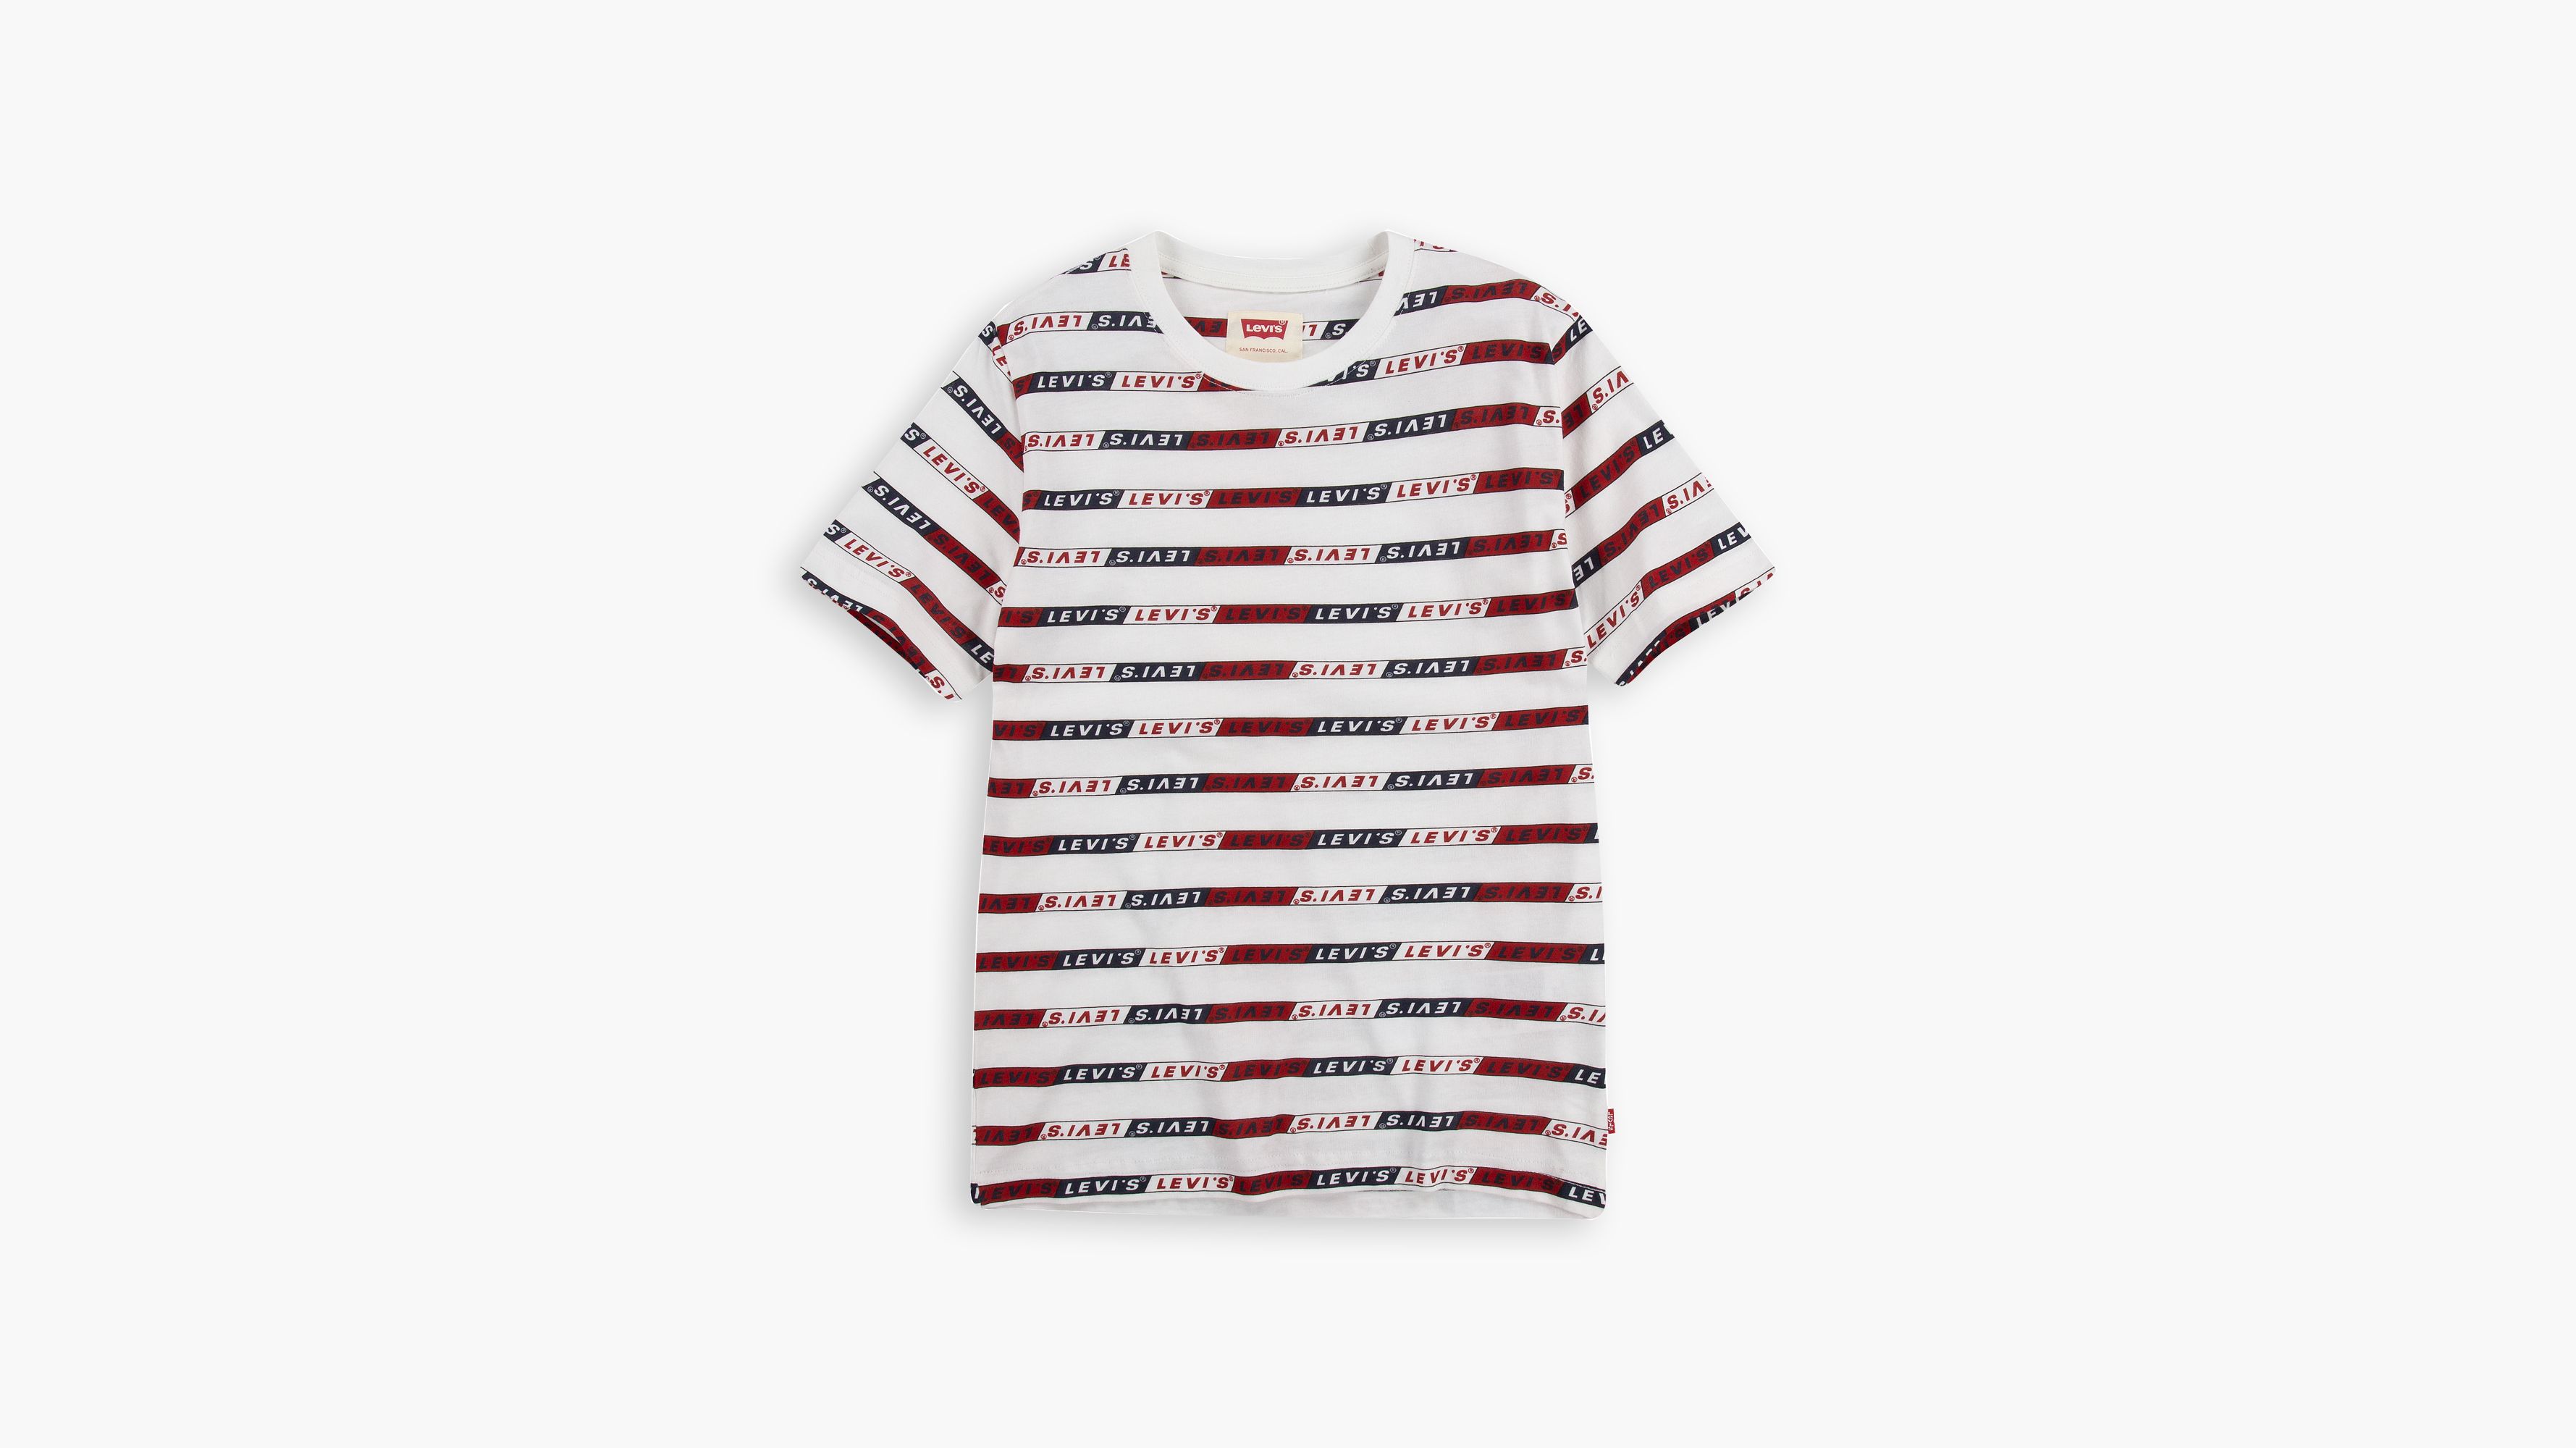 red and white levi shirt